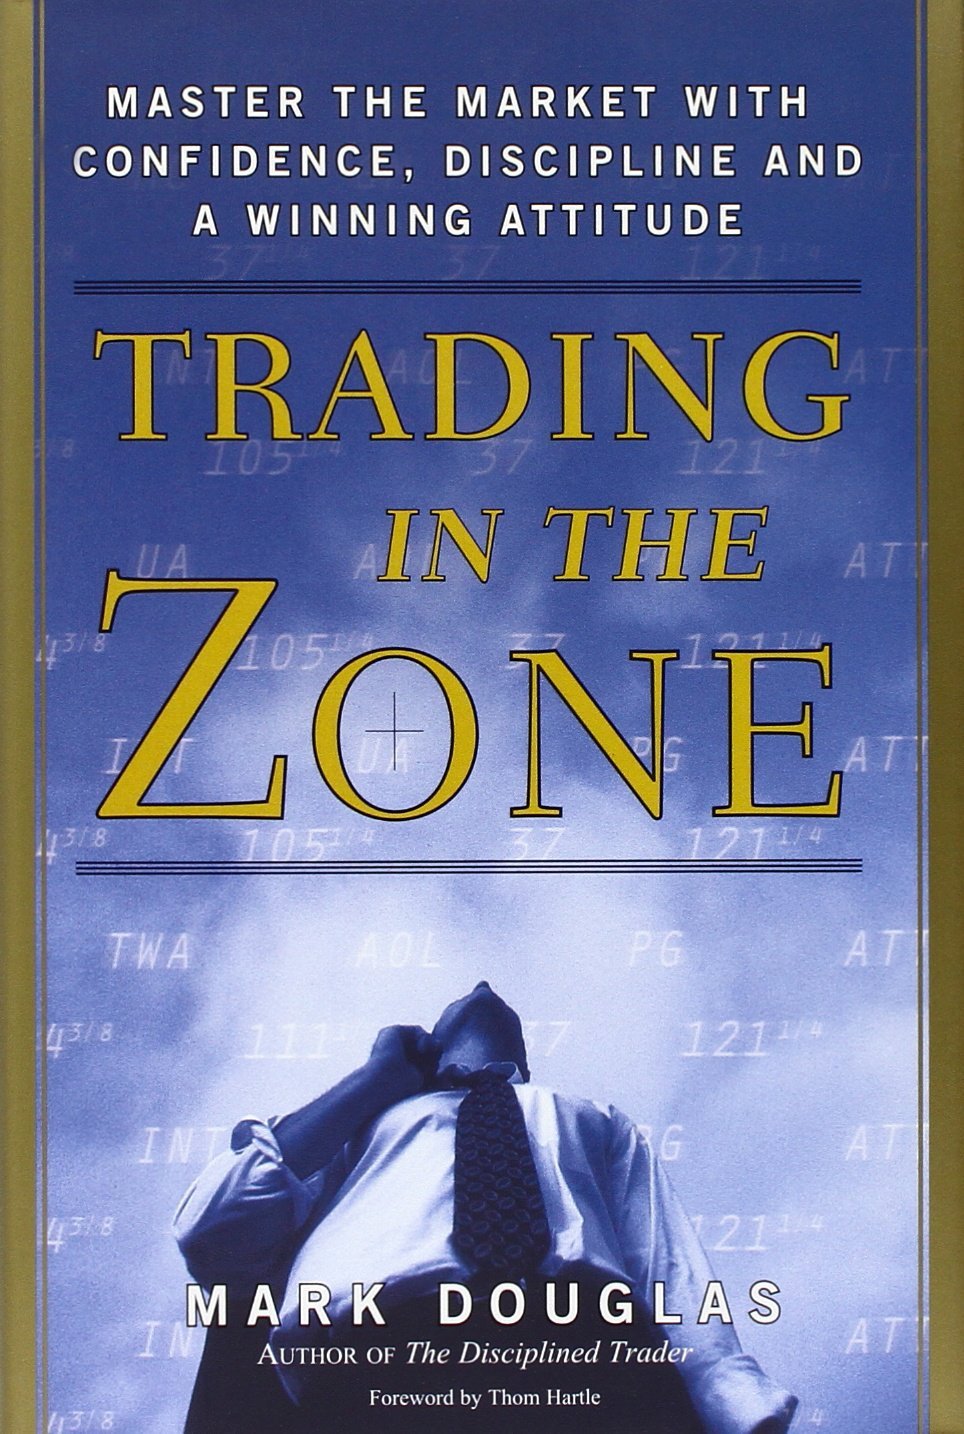 Trading in the Zone By Mark Douglas, Master the Market with Confidence, Discipline, and a Winning Attitude E-Book EPUB, MOBI